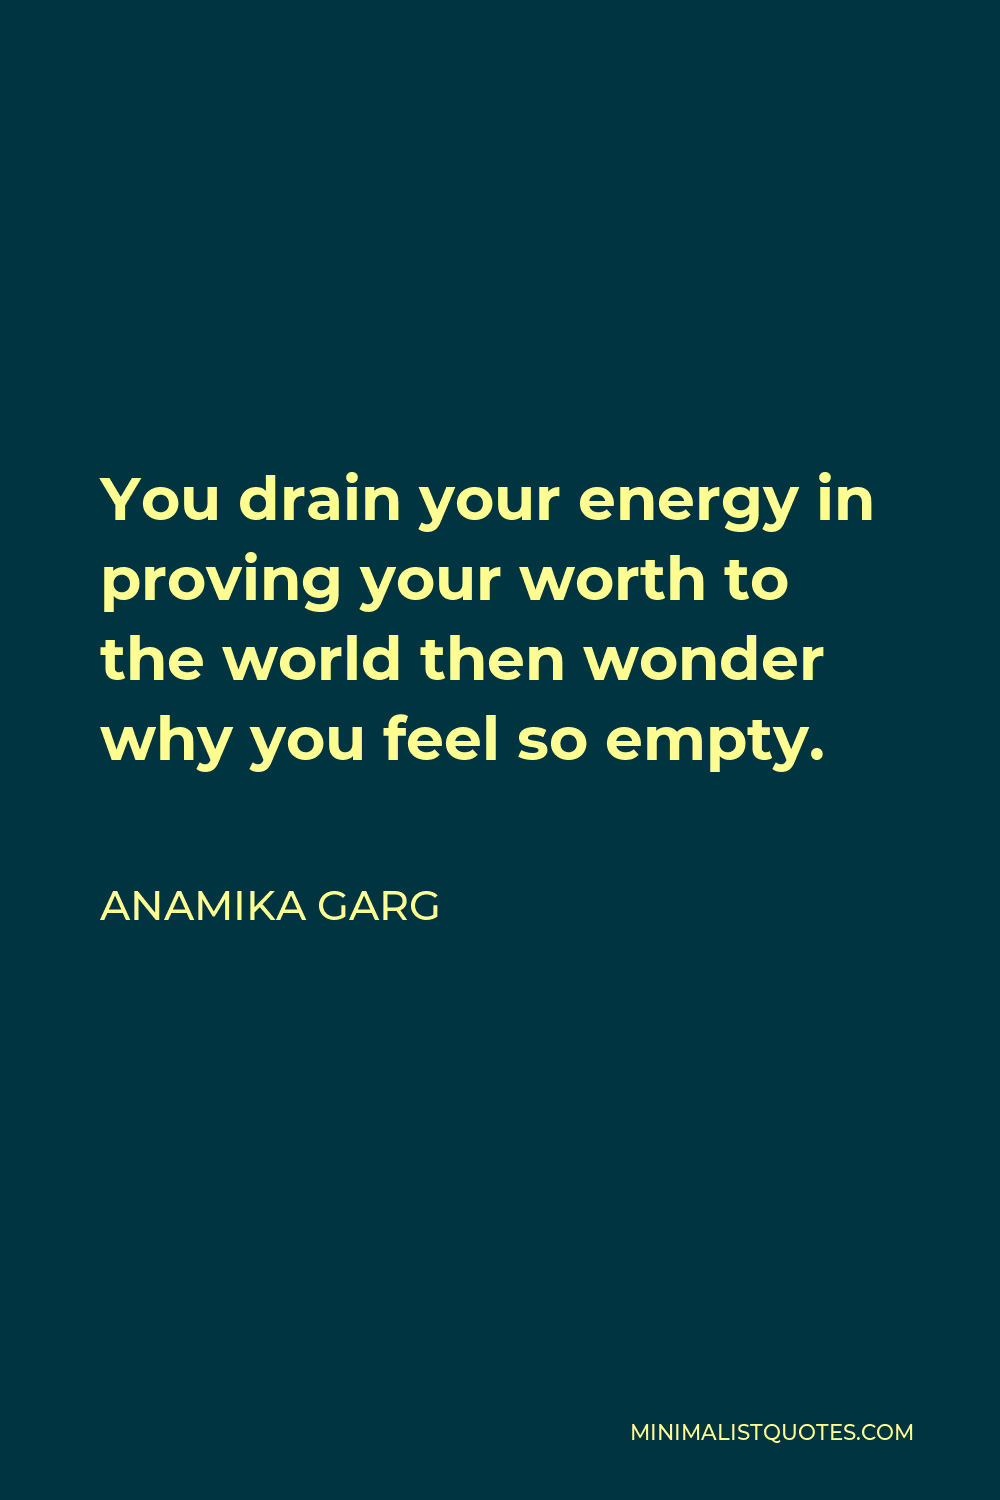 Anamika Garg Quote - You drain your energy in proving your worth to the world then wonder why you feel so empty.